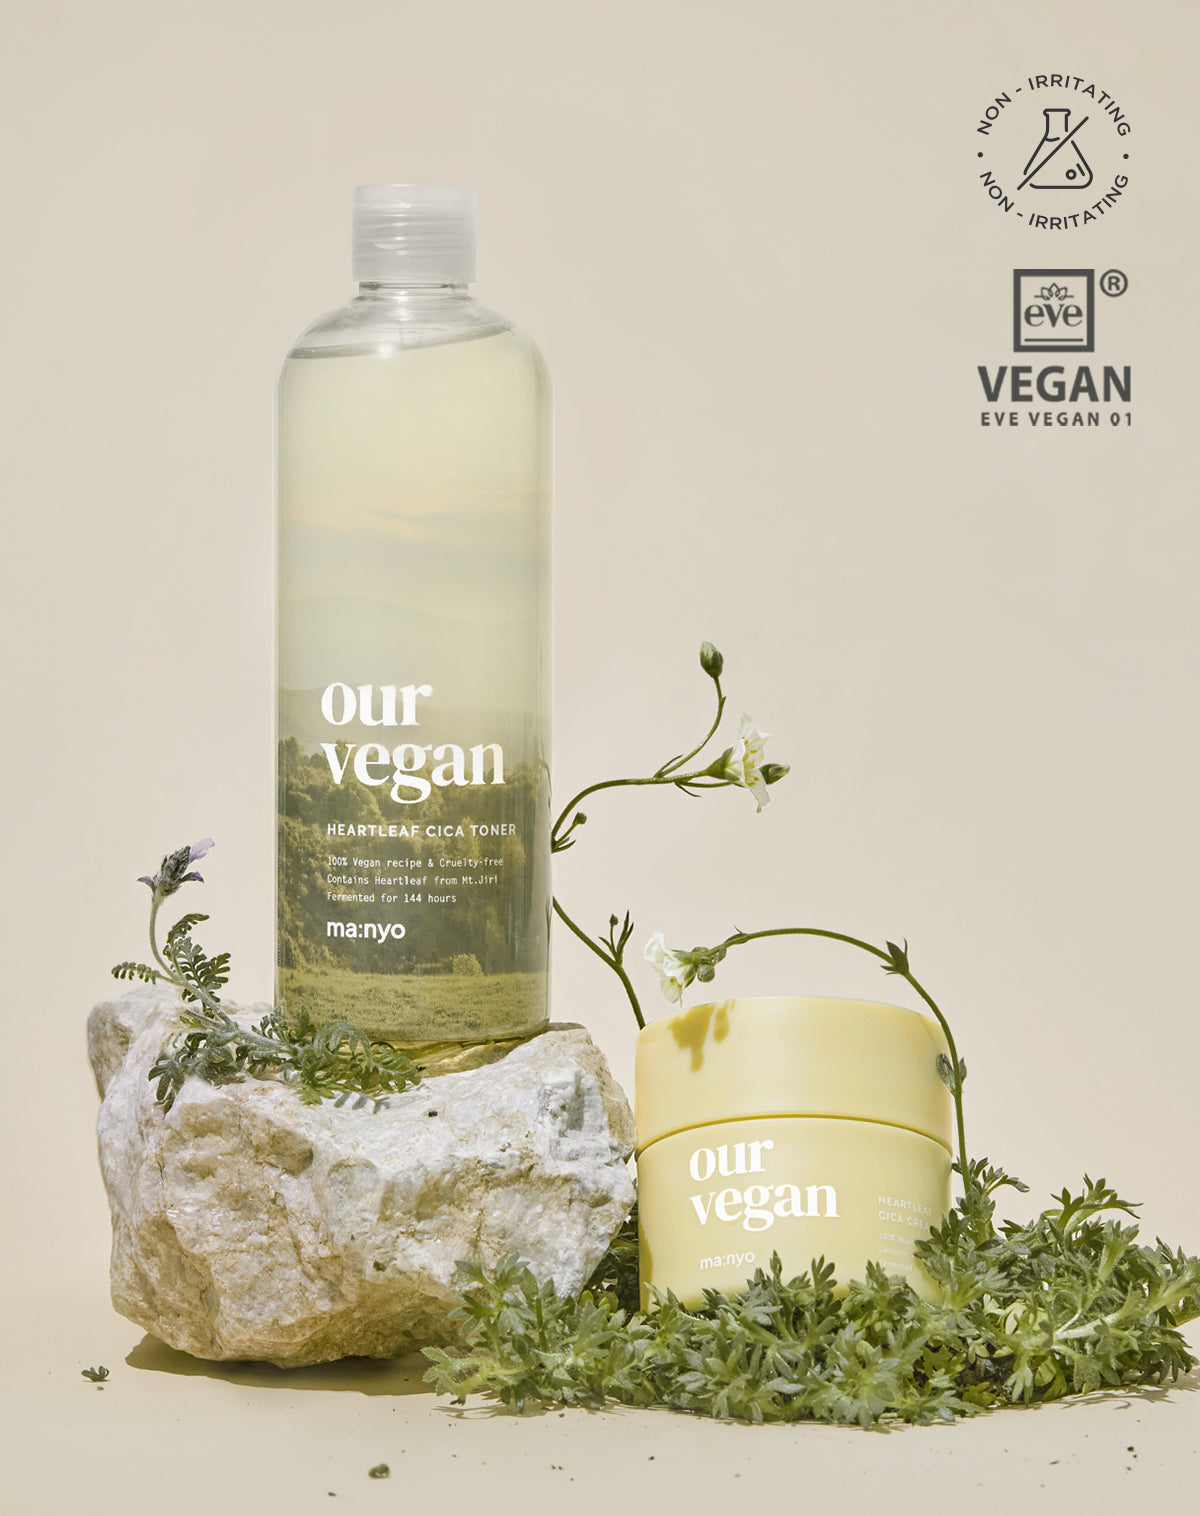 Manyo Factory Our Vegan Heartleaf Cica Toner Beauty Manyo Factory   